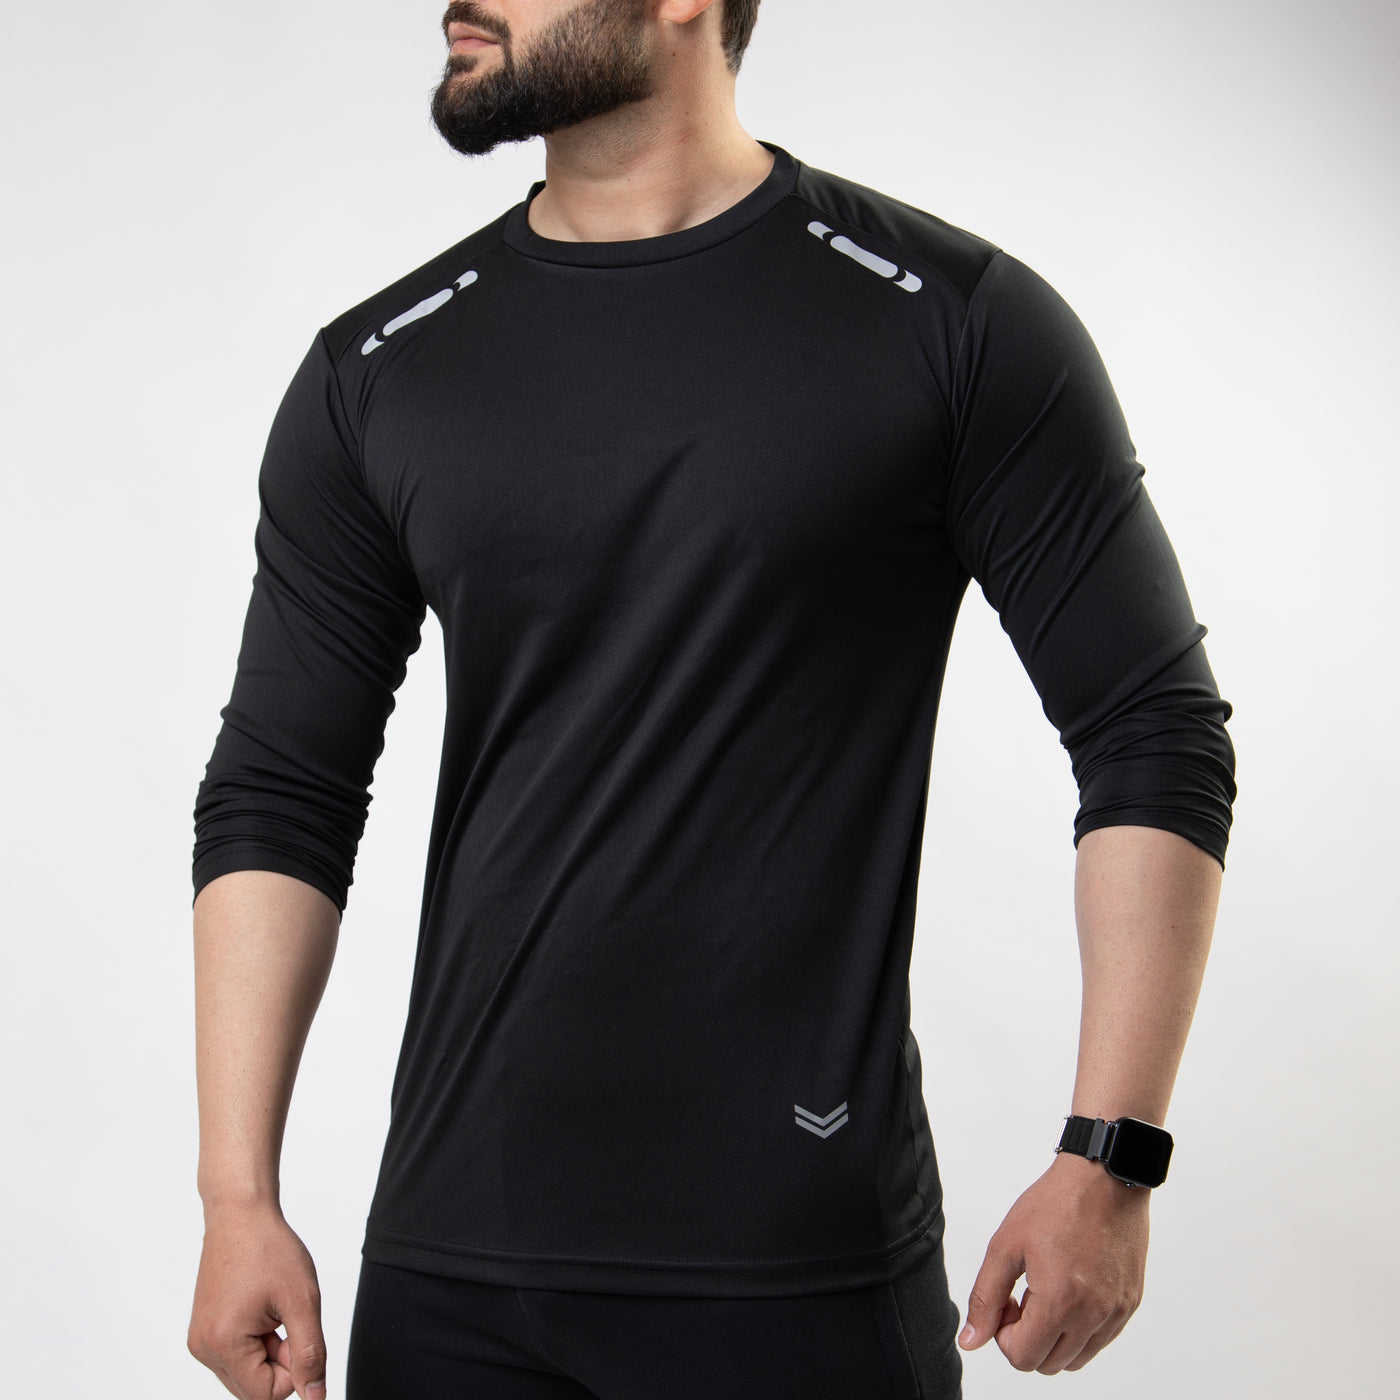 Black Quick Dry Full Sleeves T-Shirt with Front Reflectors